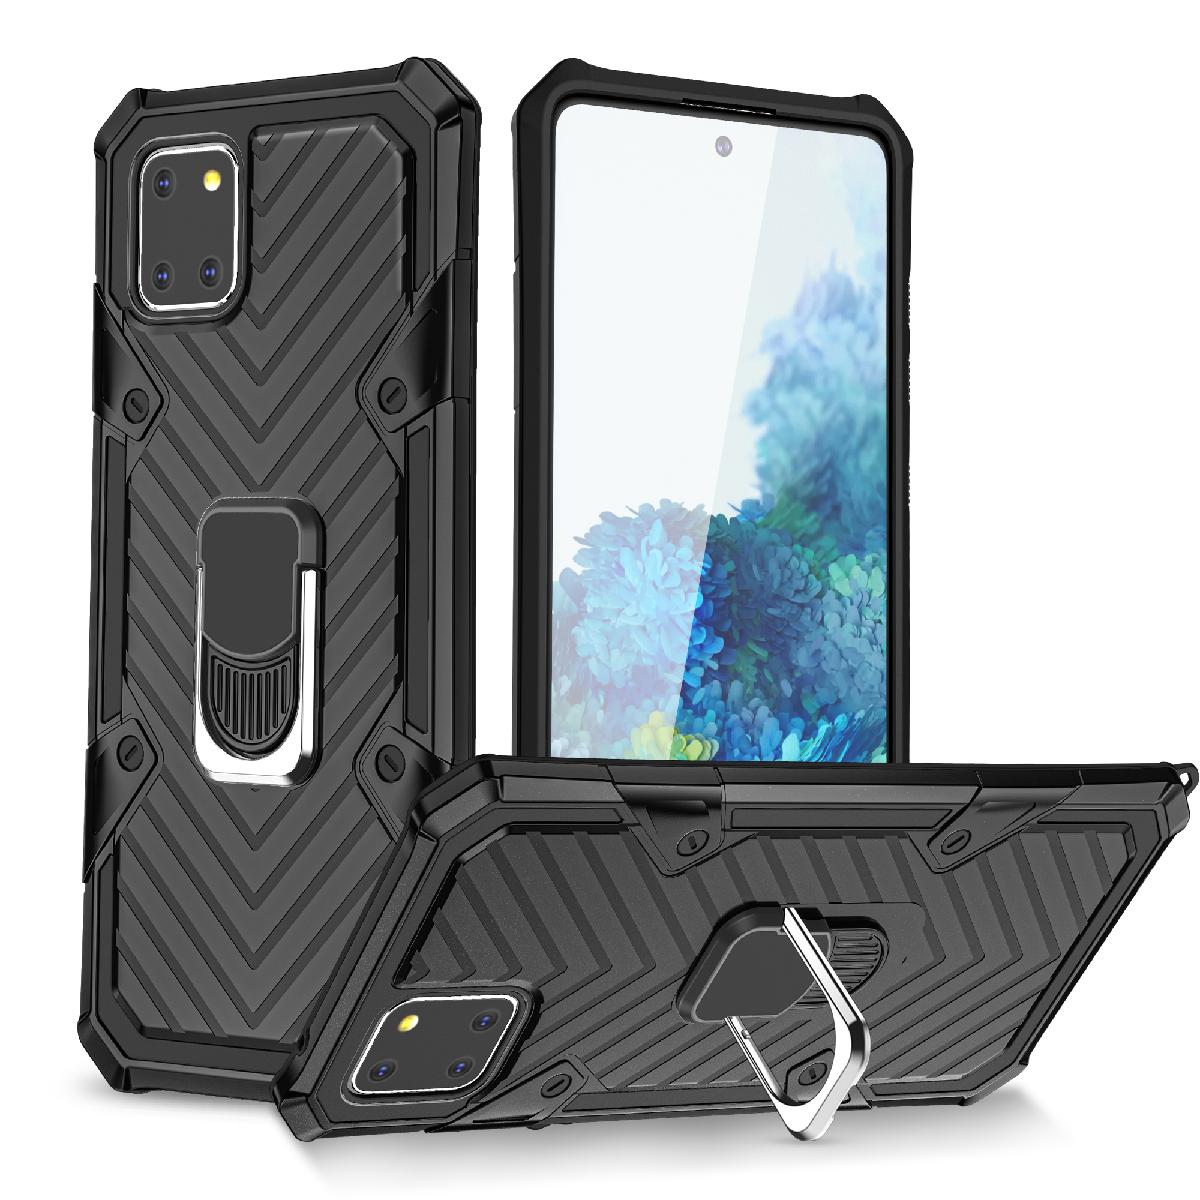 Reiko Kickstand Anti-Shock And Anti Falling Case for SAMSUNG GALAXY A81 In Black